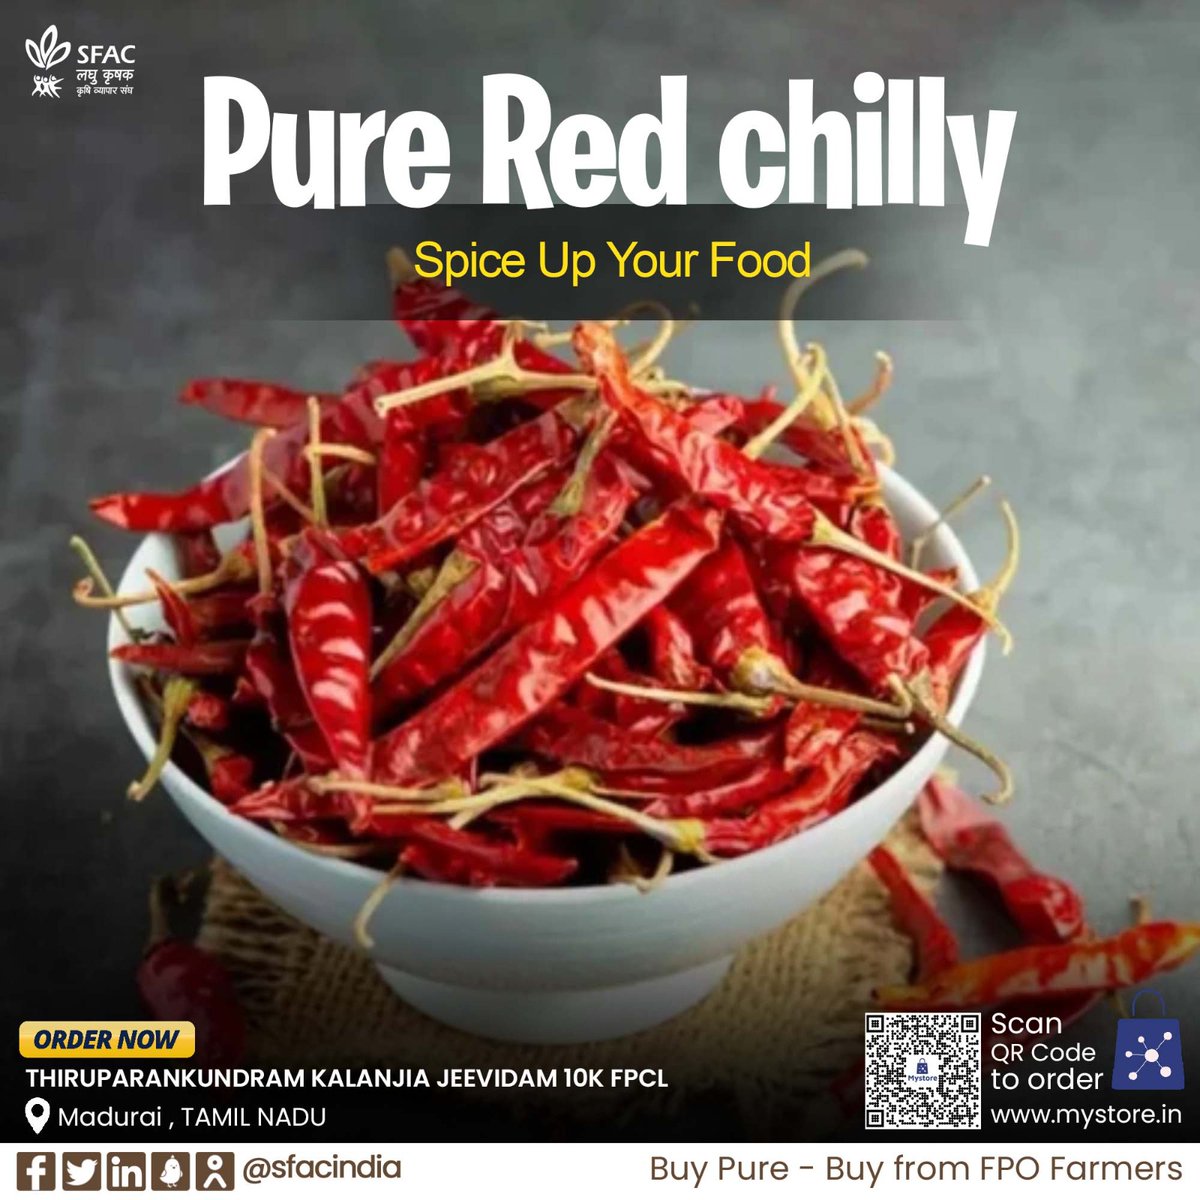 Spice up your food with the fiery flavour of organic red chili.

Buy straight from FPO farmers at👇

mystore.in/en/product/91c…

🌶️

#VocalForLocal #healthychoices #healthyeating #healthyhabits #tastyrecipes